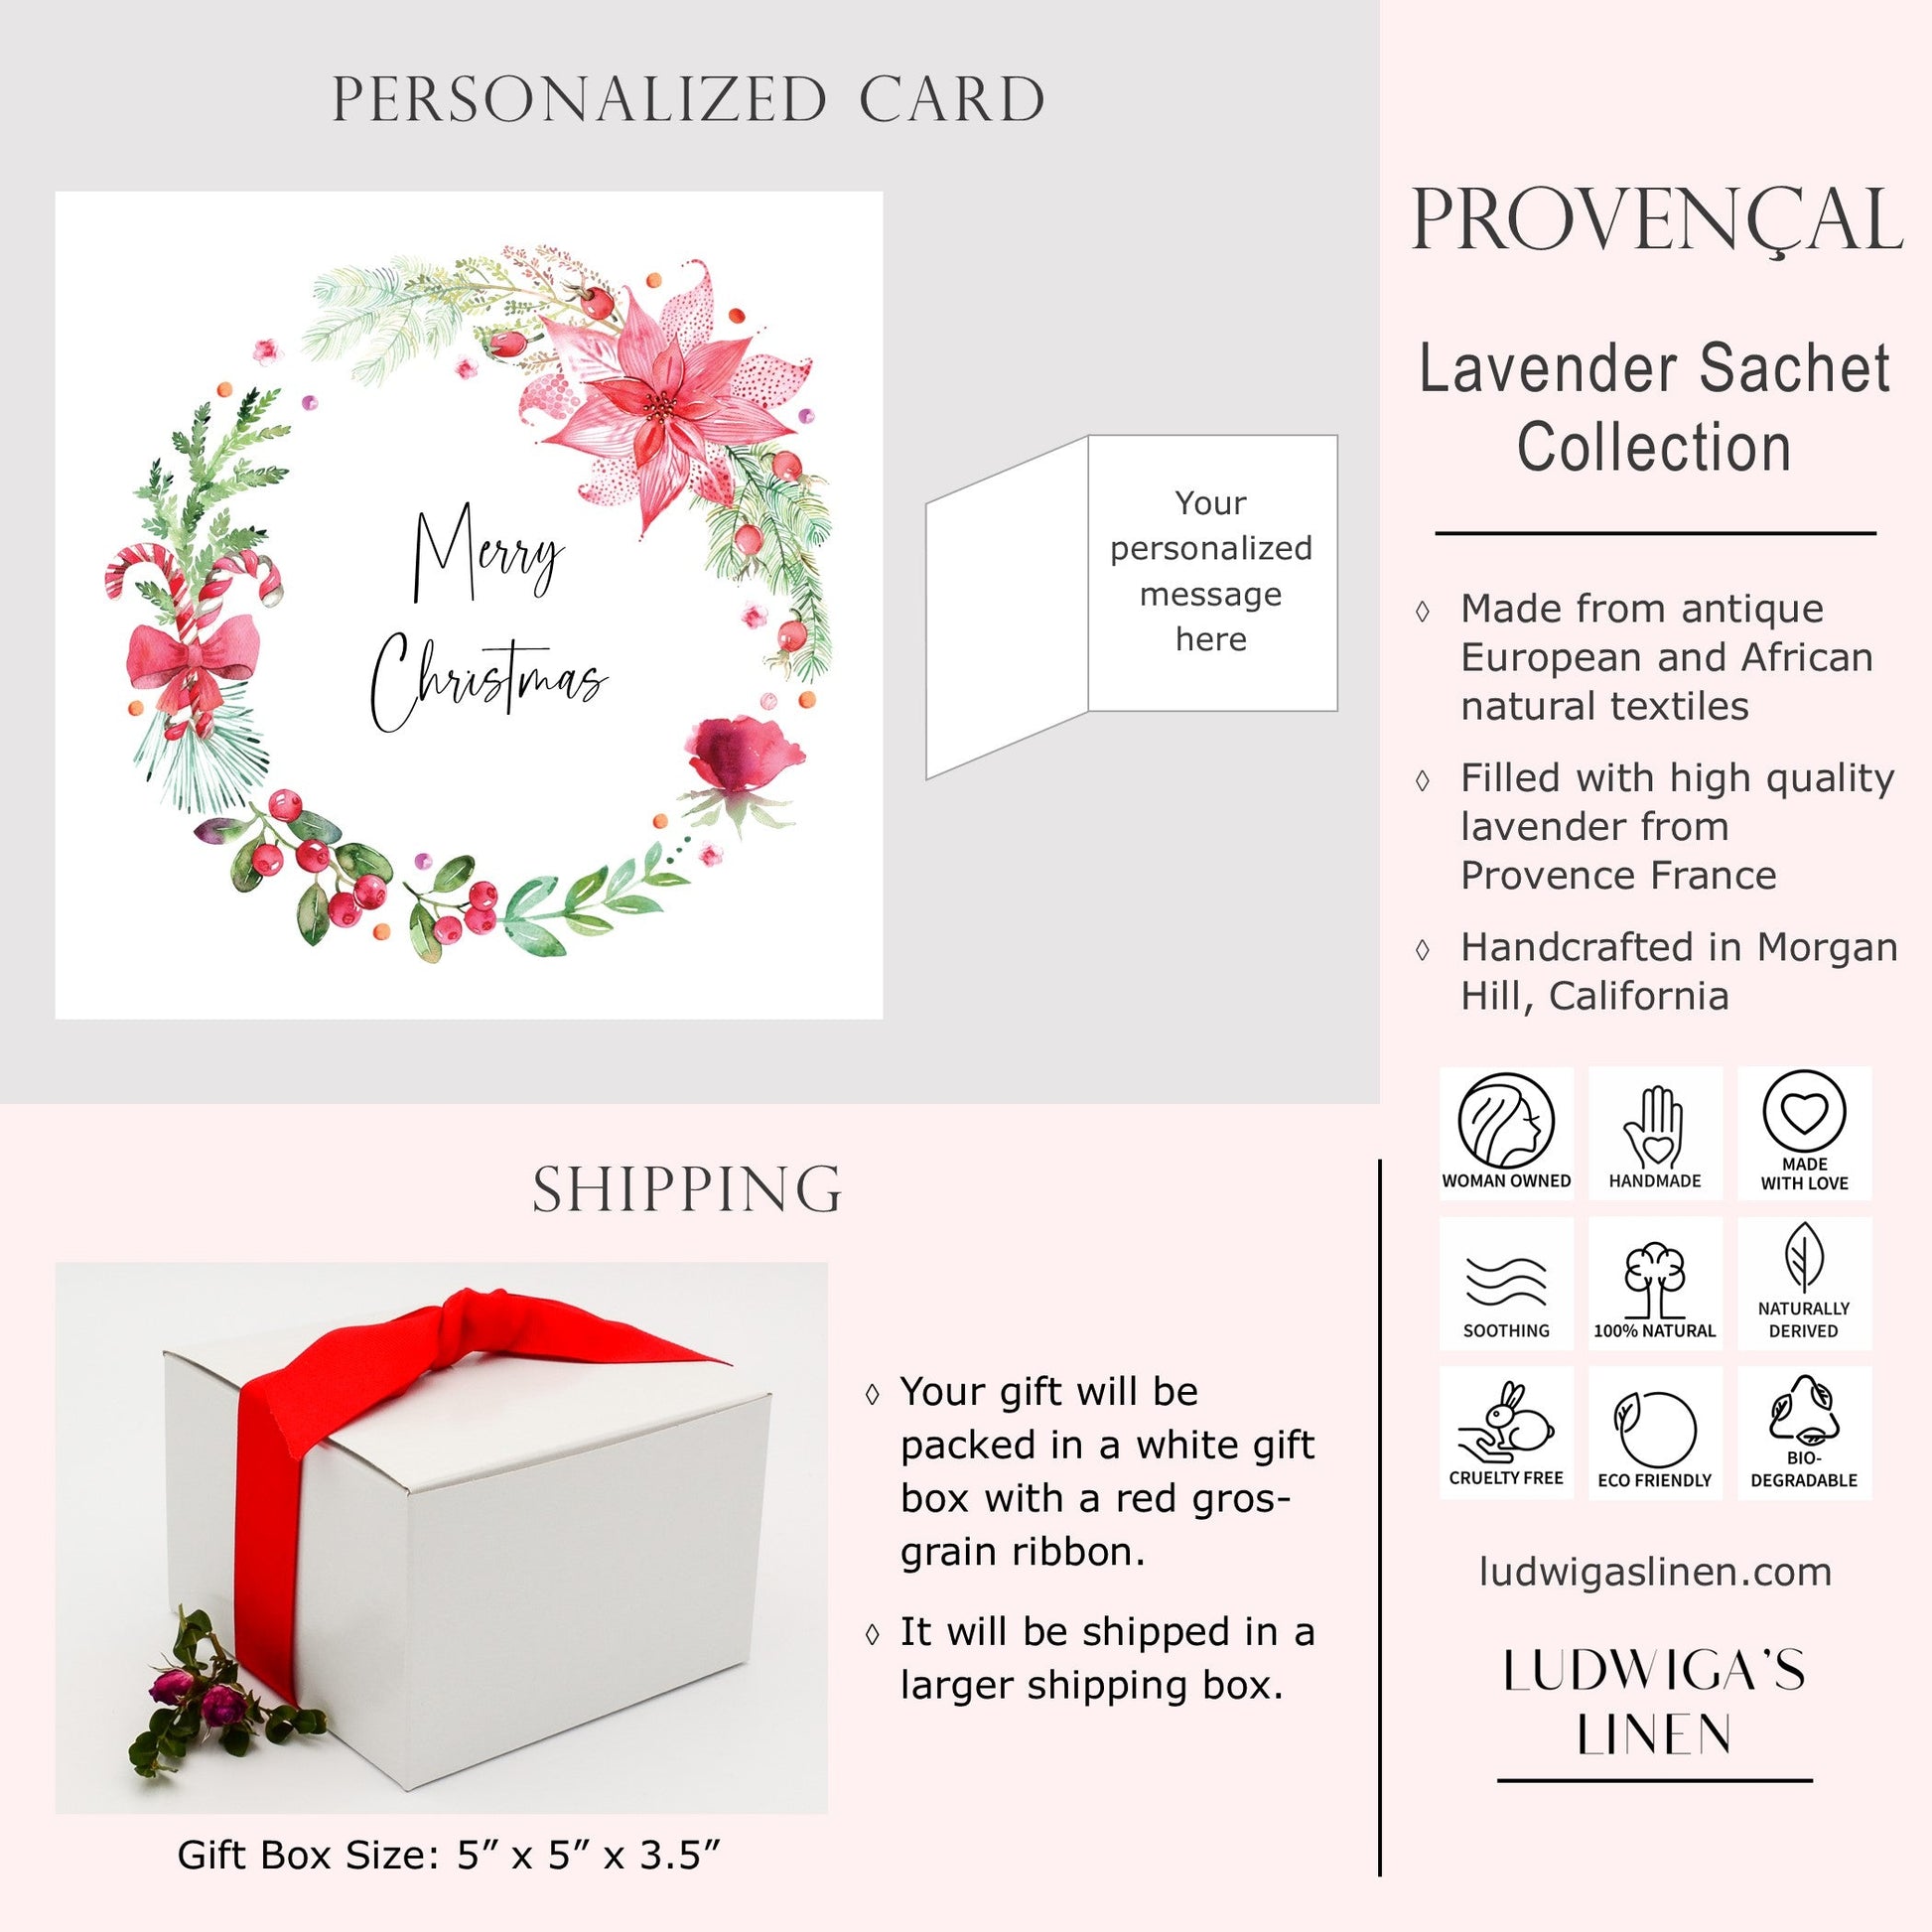 Optional gift box with red gros grain ribbon, personalized card, shipping and general information about Ludwiga's Linen Provençal sachet collection